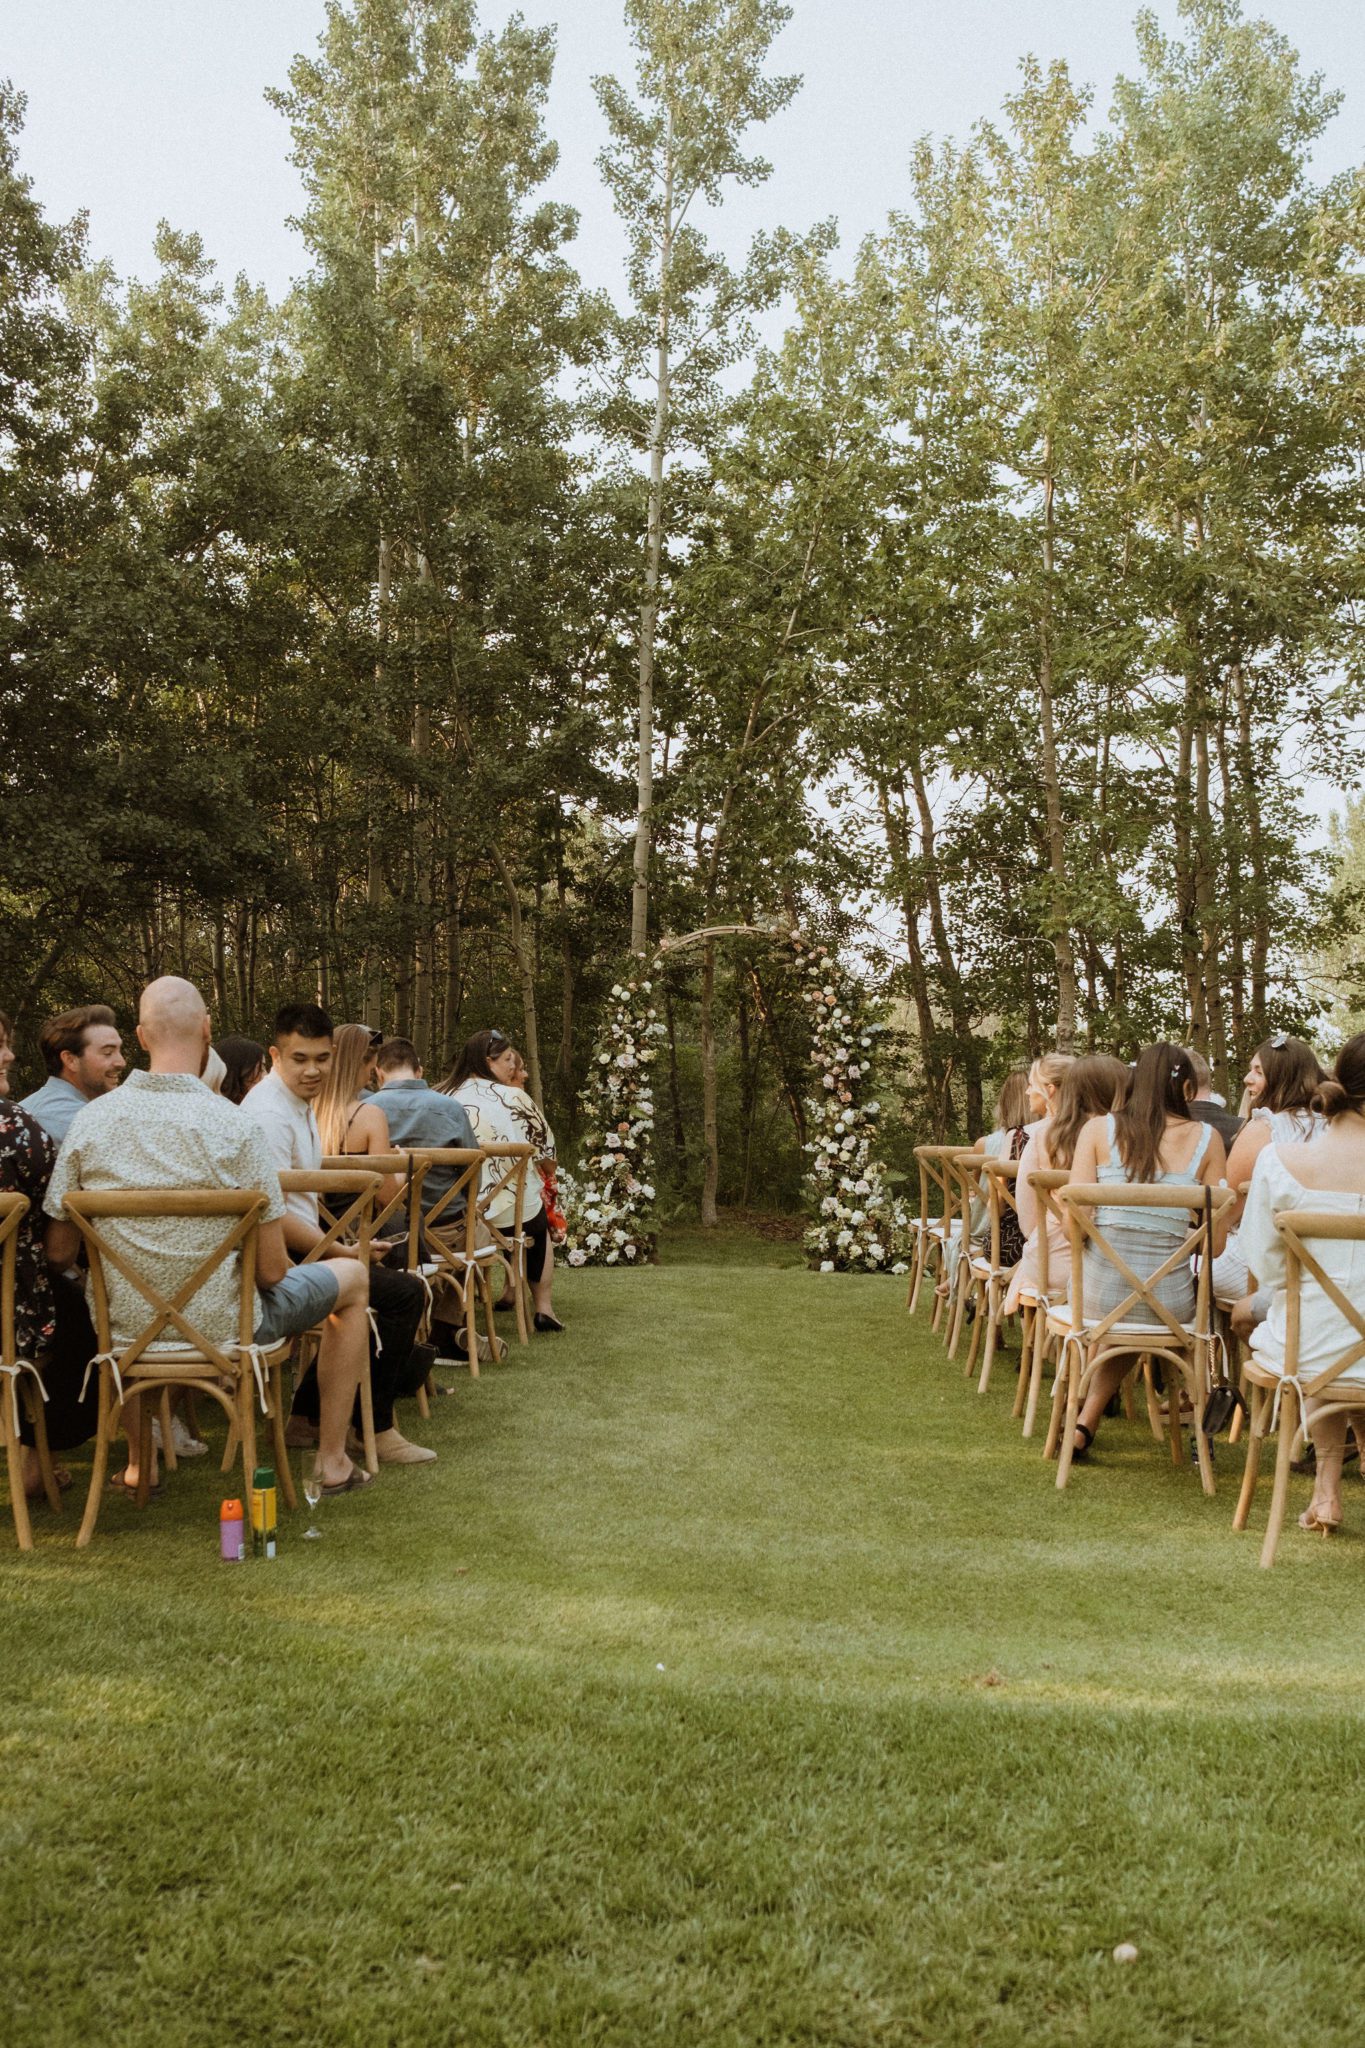 Dramatic floral arch is the centerpiece for this outdoor summer wedding, summer wedding decor inspiration